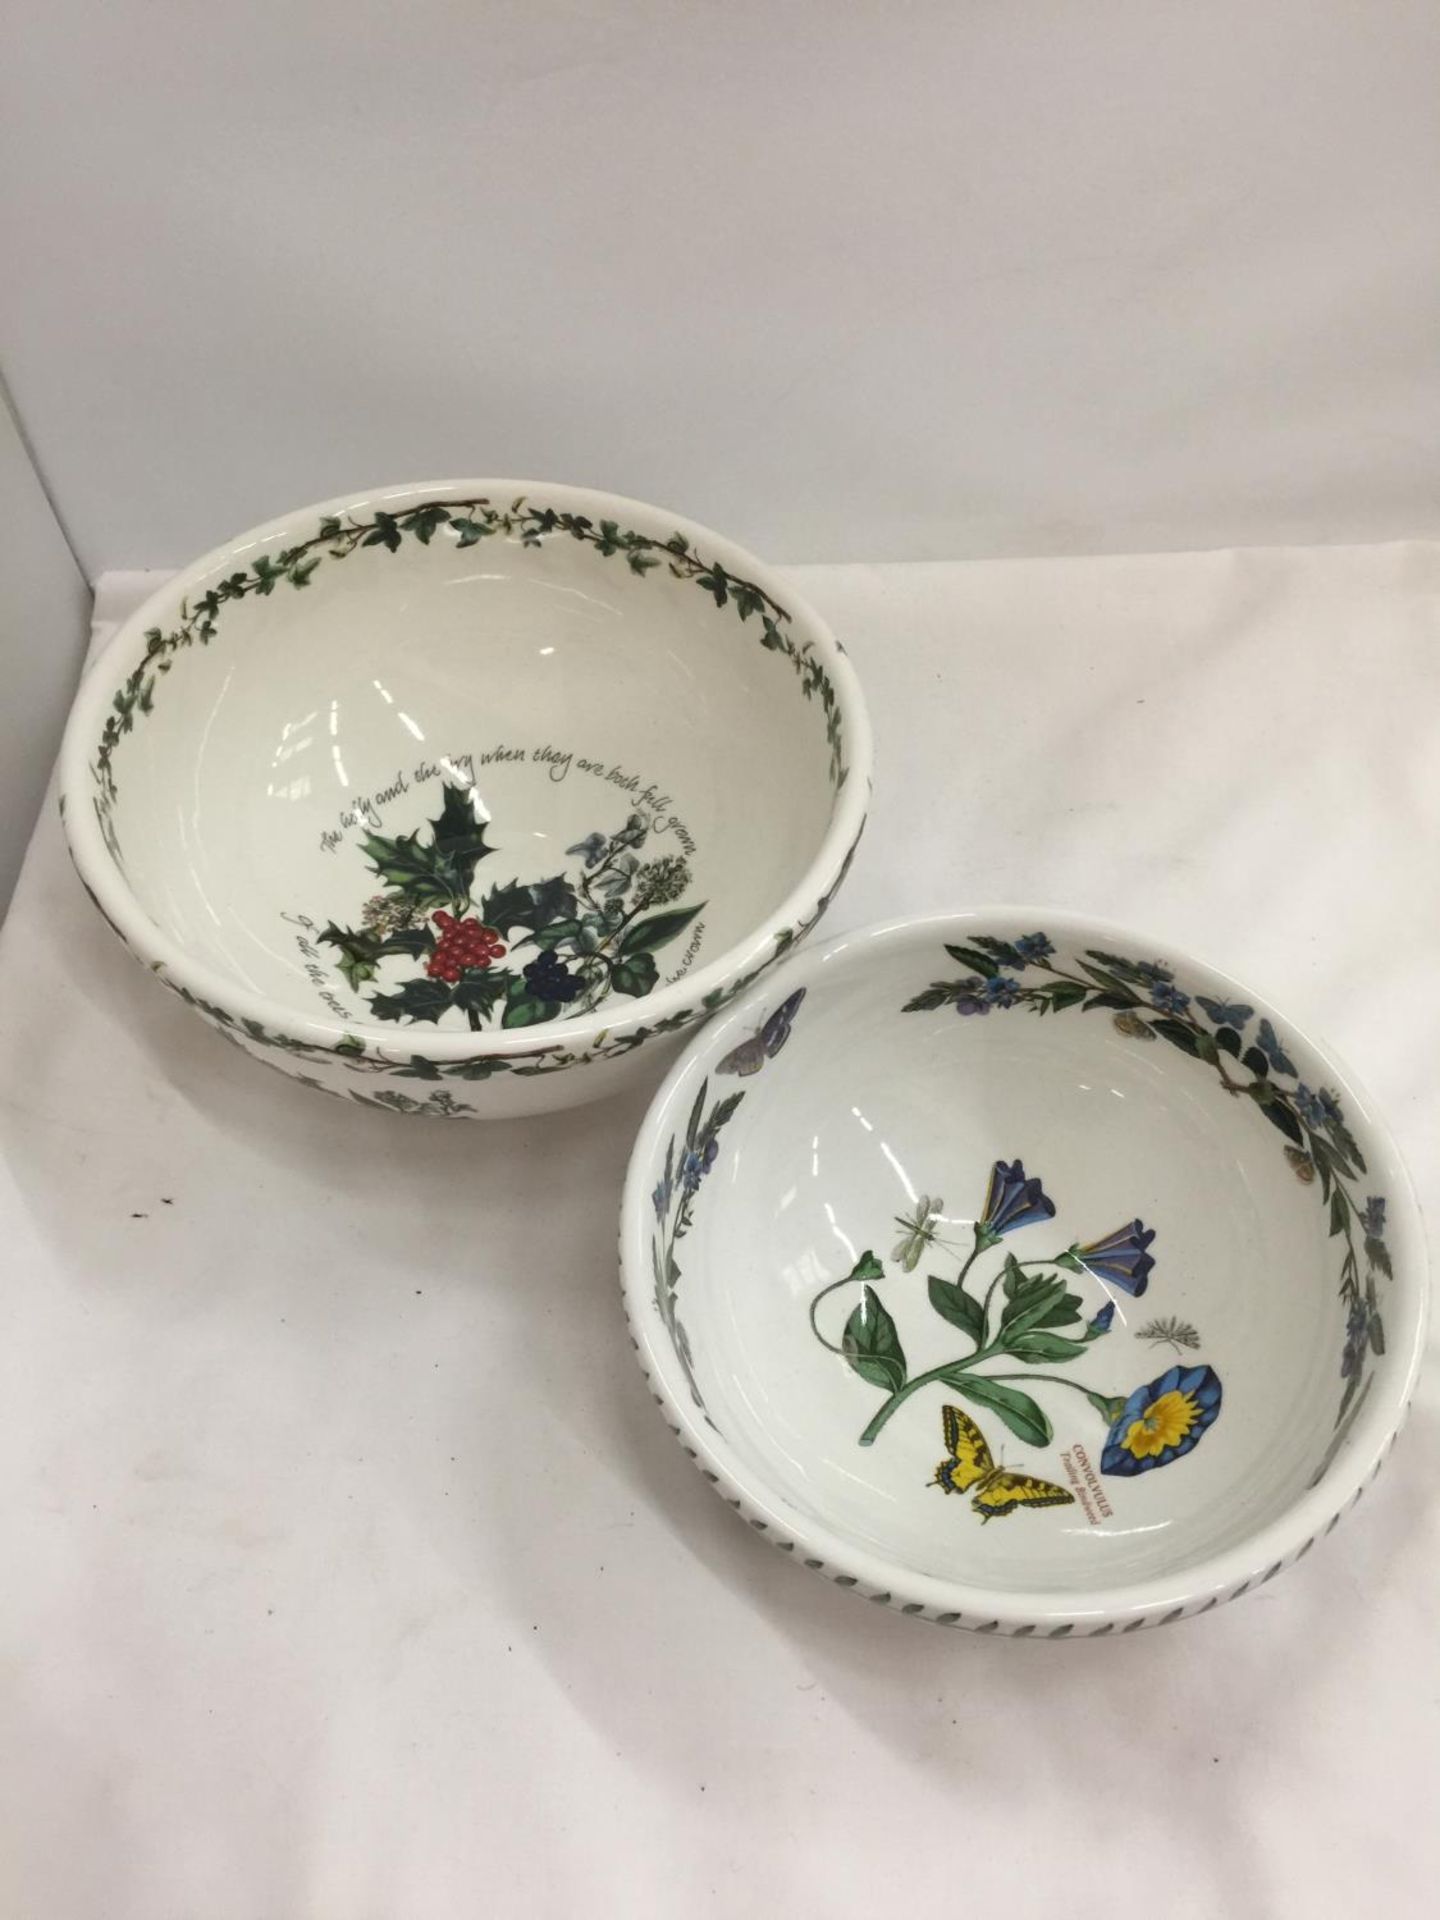 TWO PORTMERION BOWLS, ONE BEING CHRISTMAS 'THE HOLLY AND THE IVY' DIAMETER 23.5CM, THE OTHER - Image 2 of 3